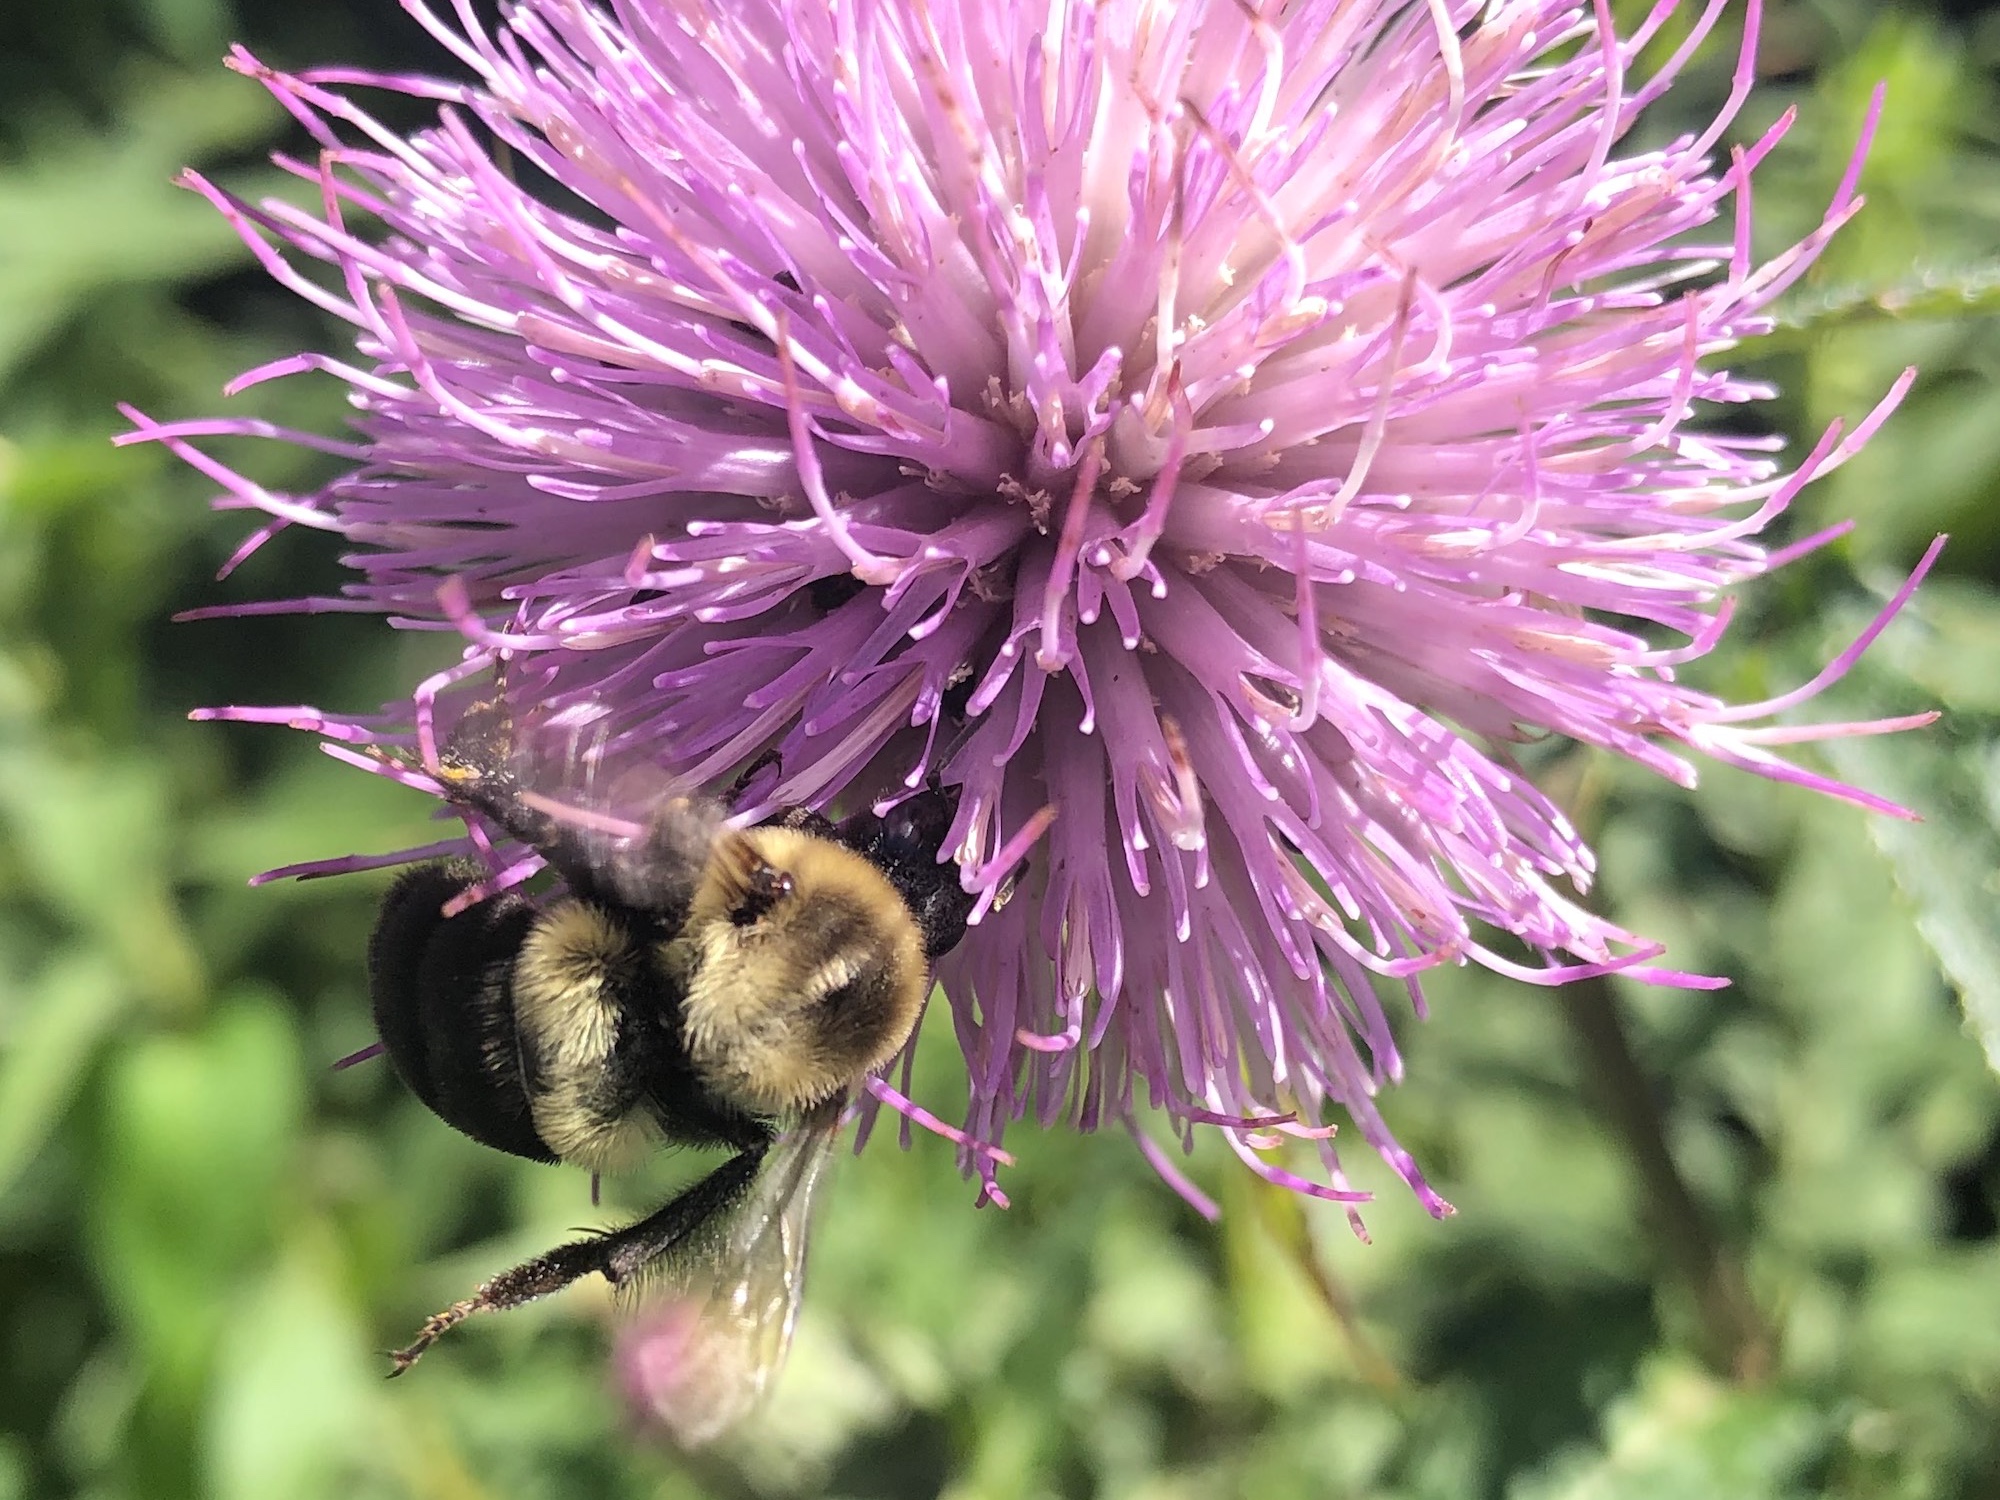 Bumblebee on Thistle on August 11, 2020.